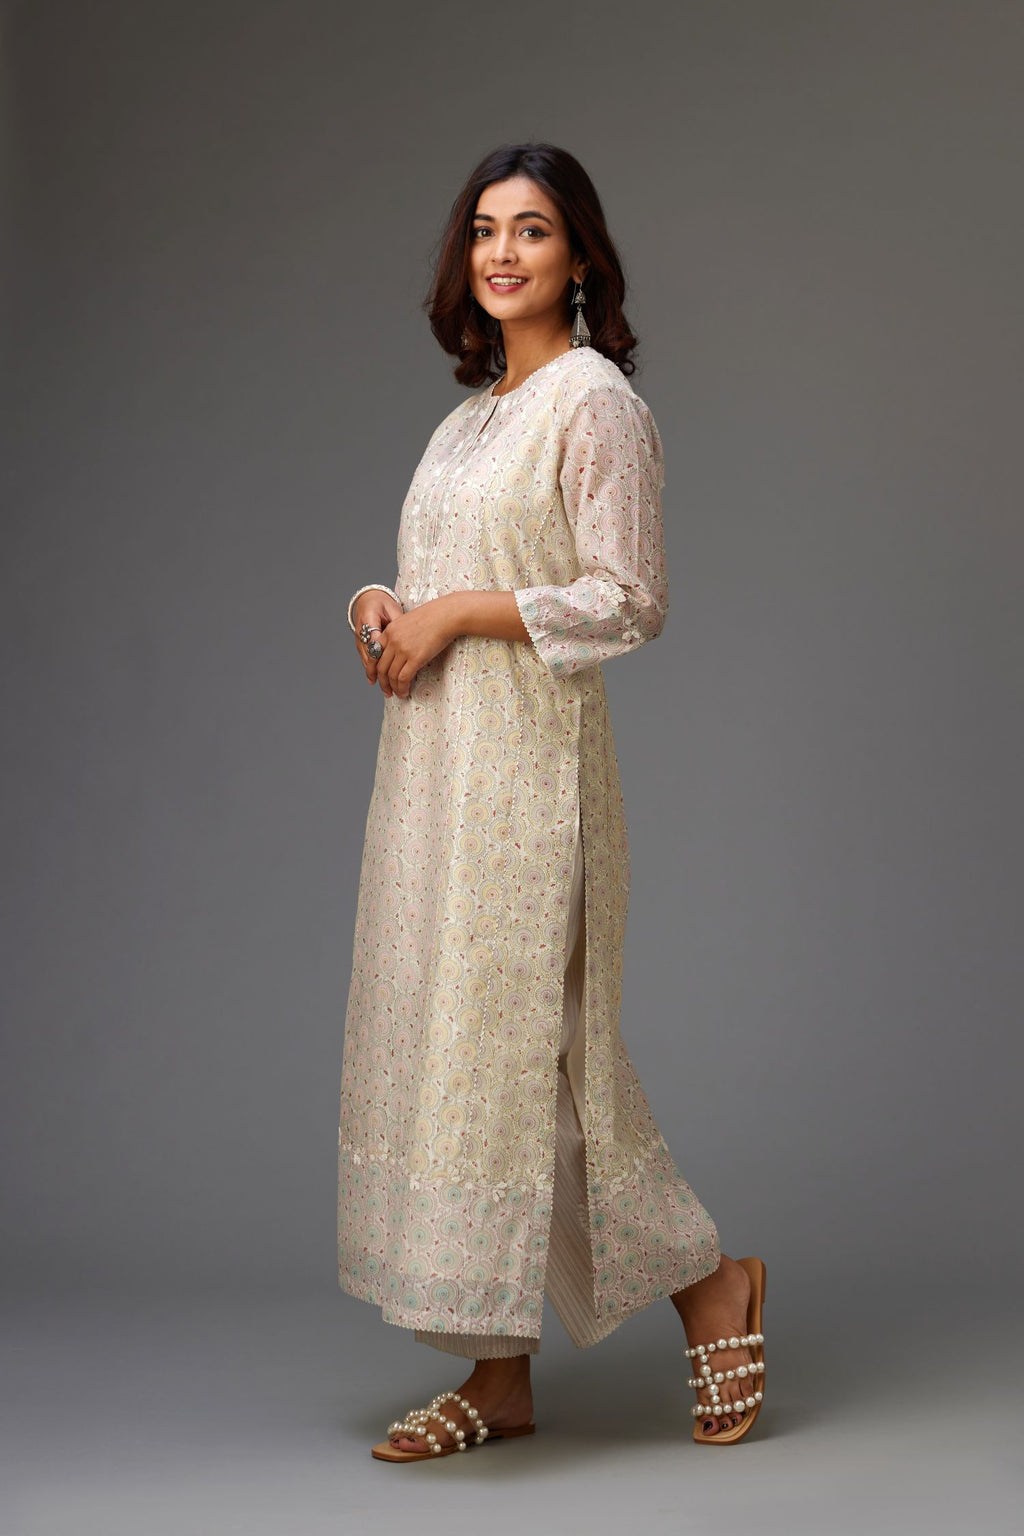 Silk Chanderi hand-block printed kurta set with multi-print panels, highlighted with white thread embroidery and chiffon flowers.